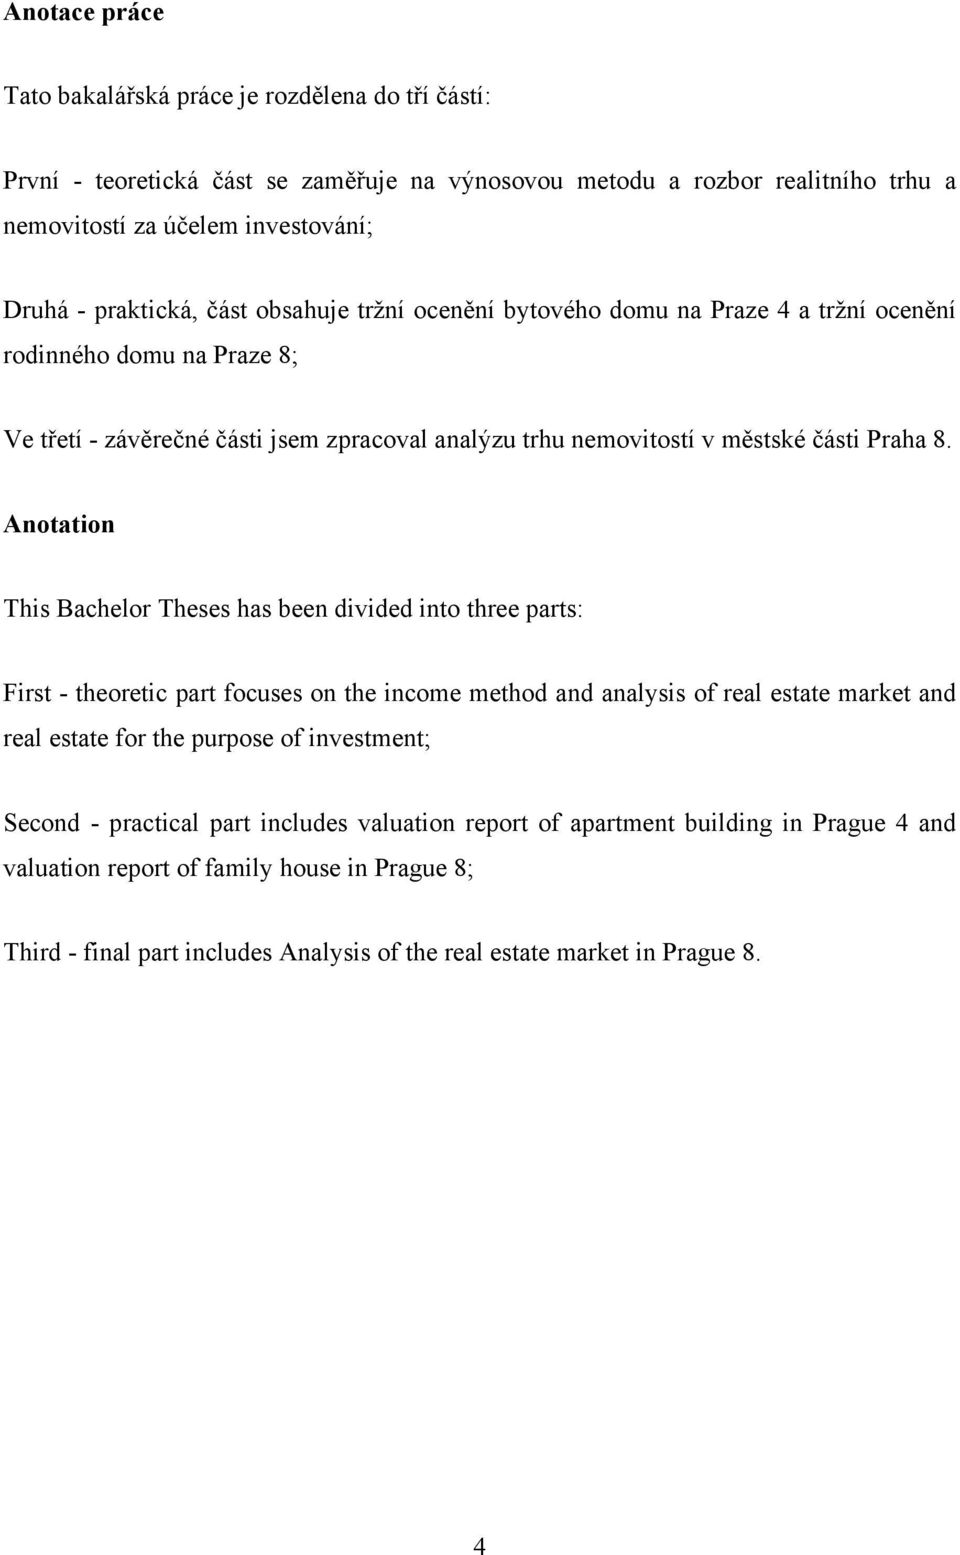 Anotation This Bachelor Theses has been divided into three parts: First - theoretic part focuses on the income method and analysis of real estate market and real estate for the purpose of investment;